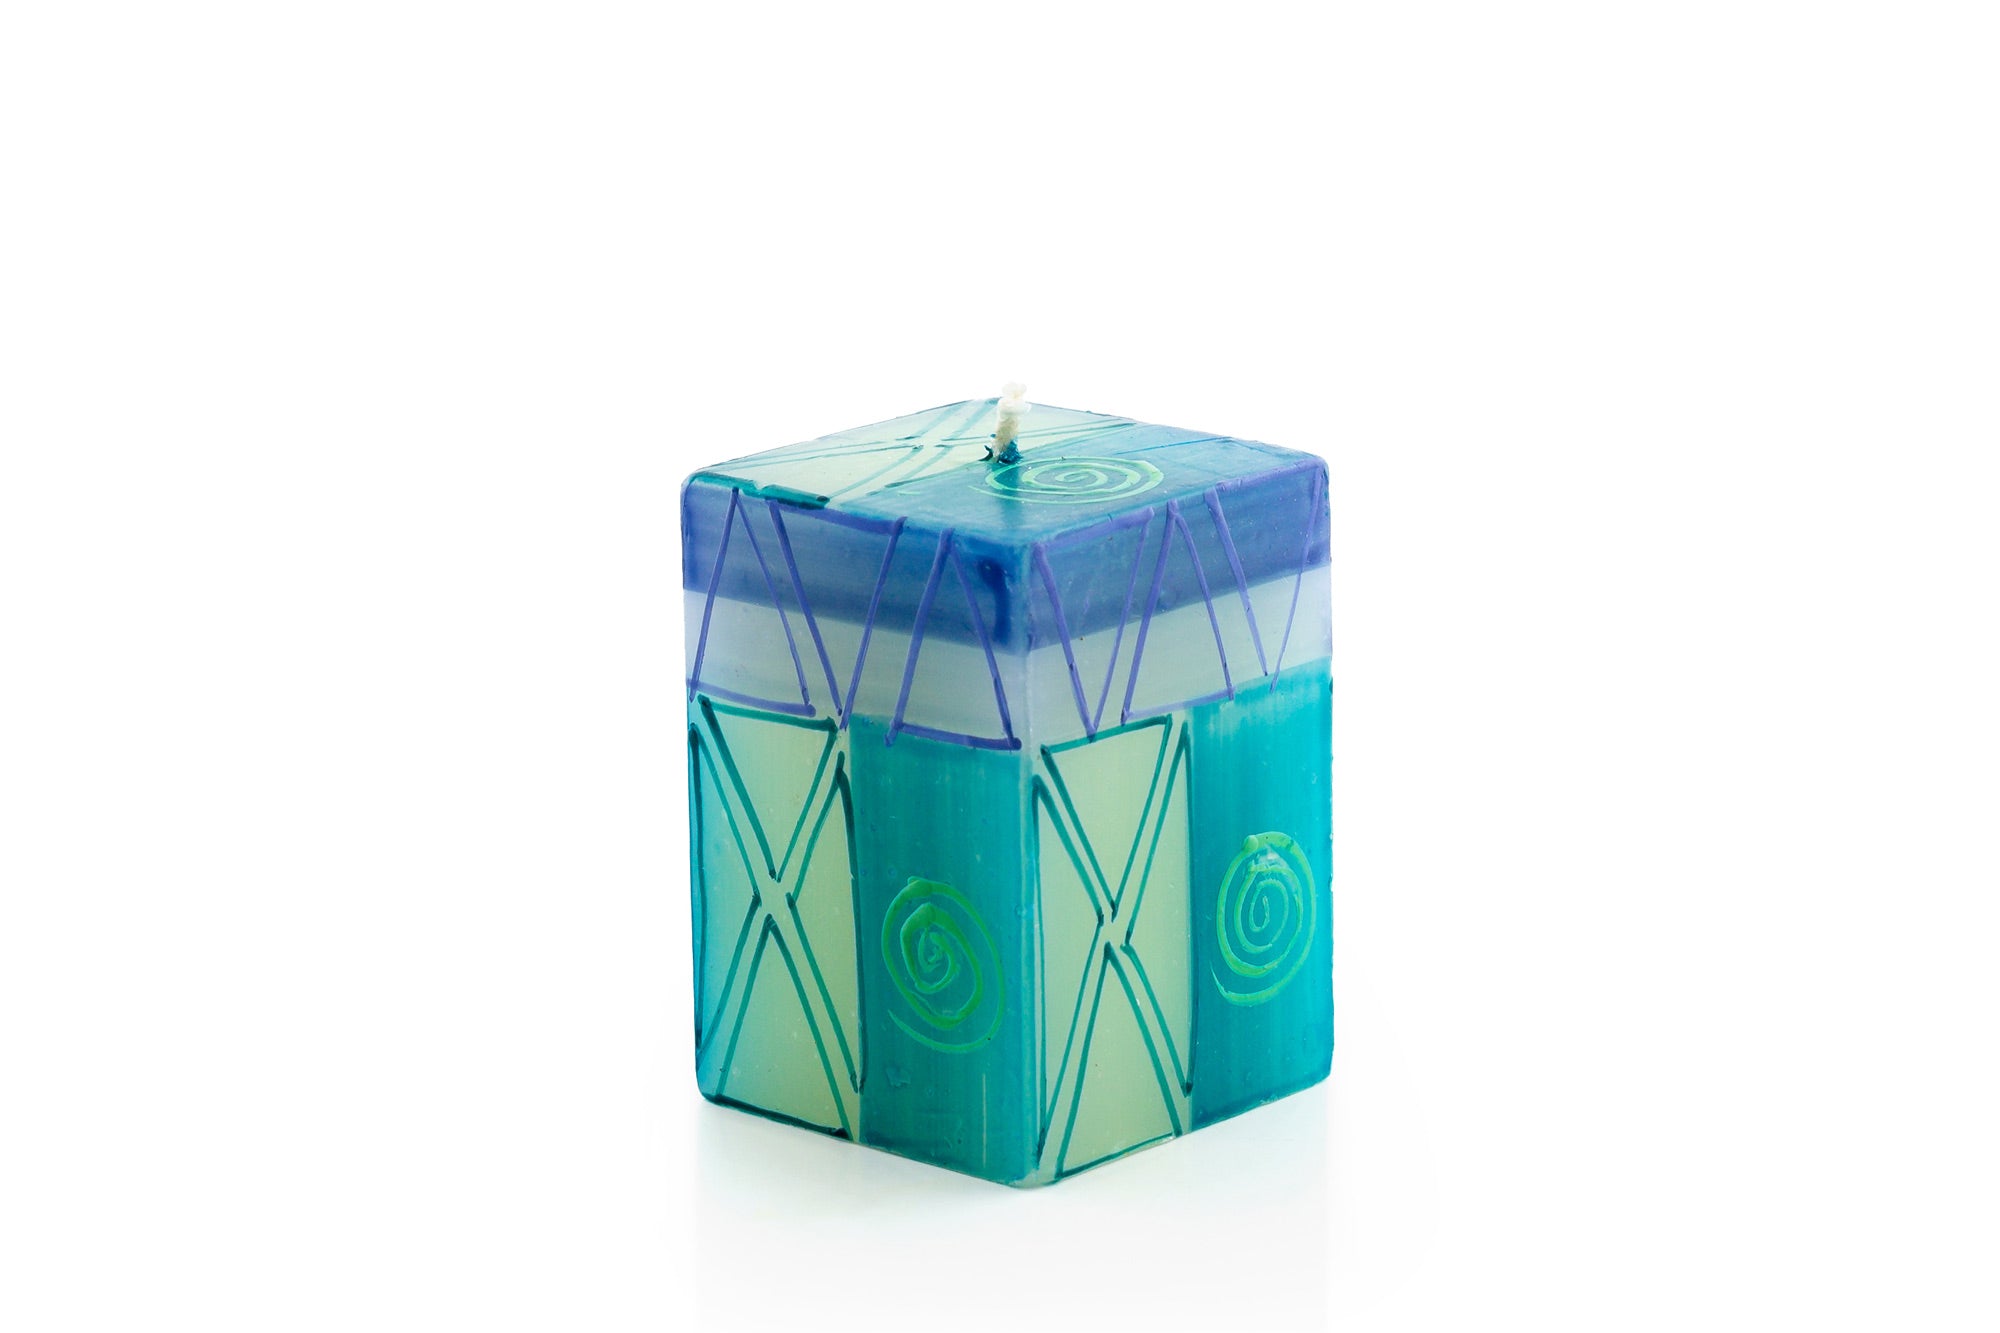 Blue & Green 2x2x3" cube candle. Indigo blue, turquoise, greens and touch of purple in various circle and triangle designs.